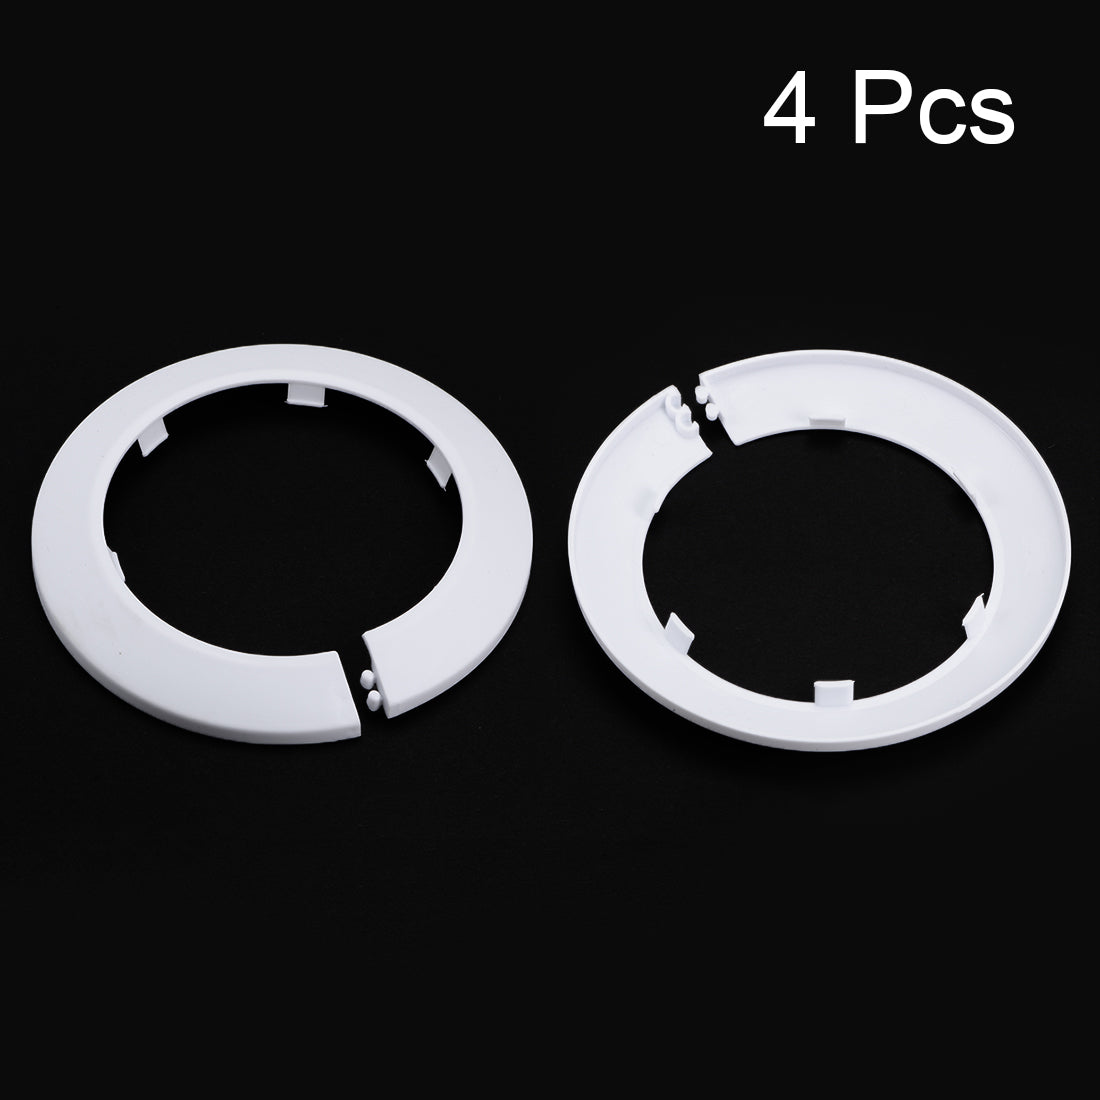 uxcell Uxcell 89mm Pipe Cover Decoration PP Plastic Water Pipe Escutcheon White 4pcs